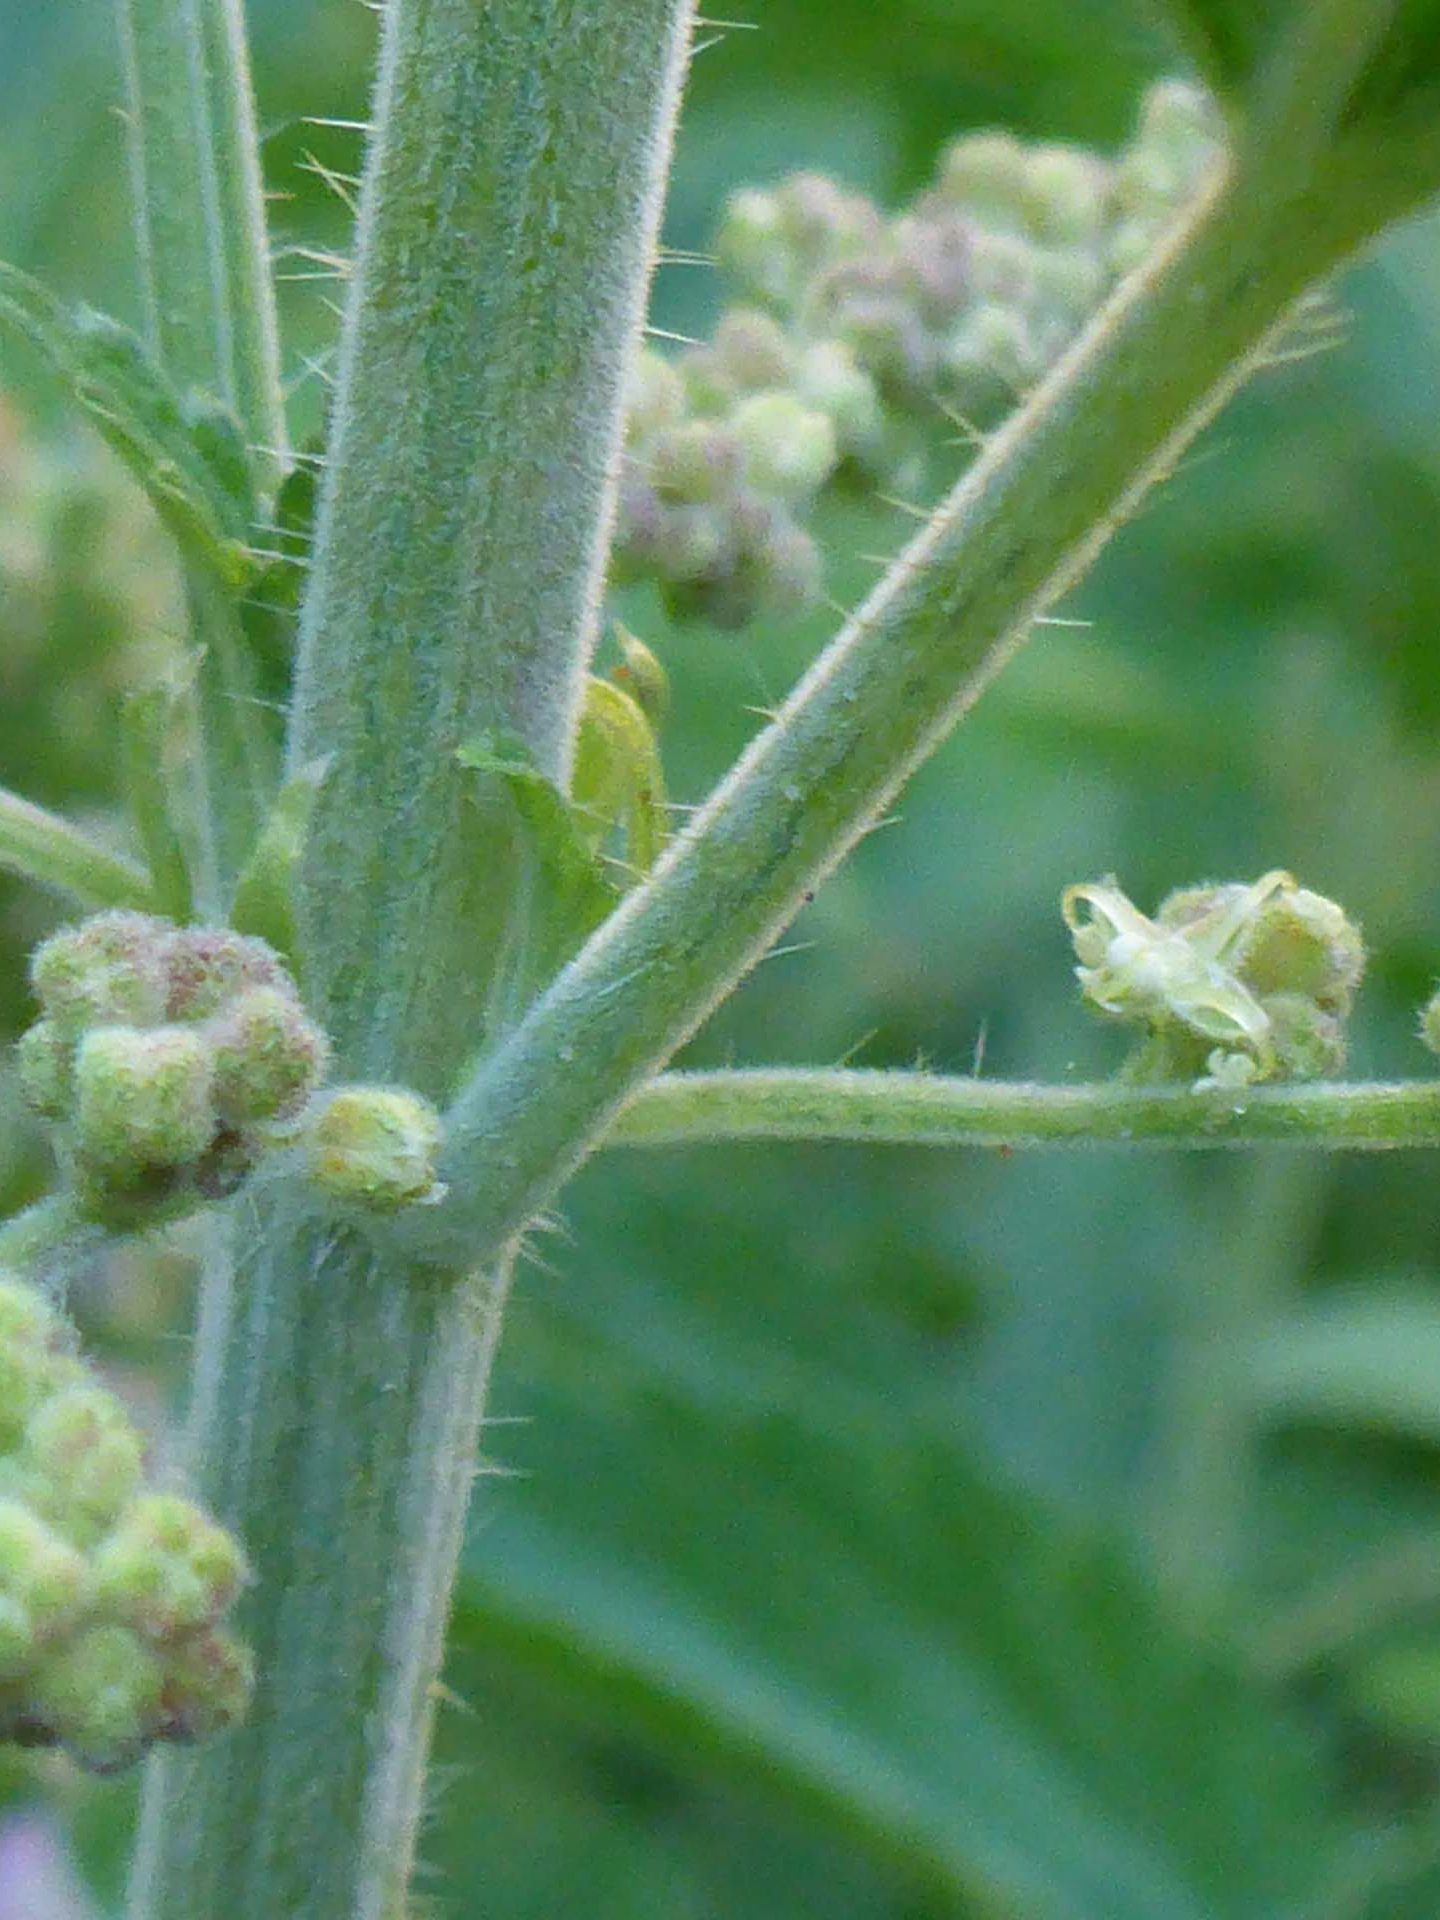 Close-up of buds, flower, and barbs of stinging nettle. D. Burk.